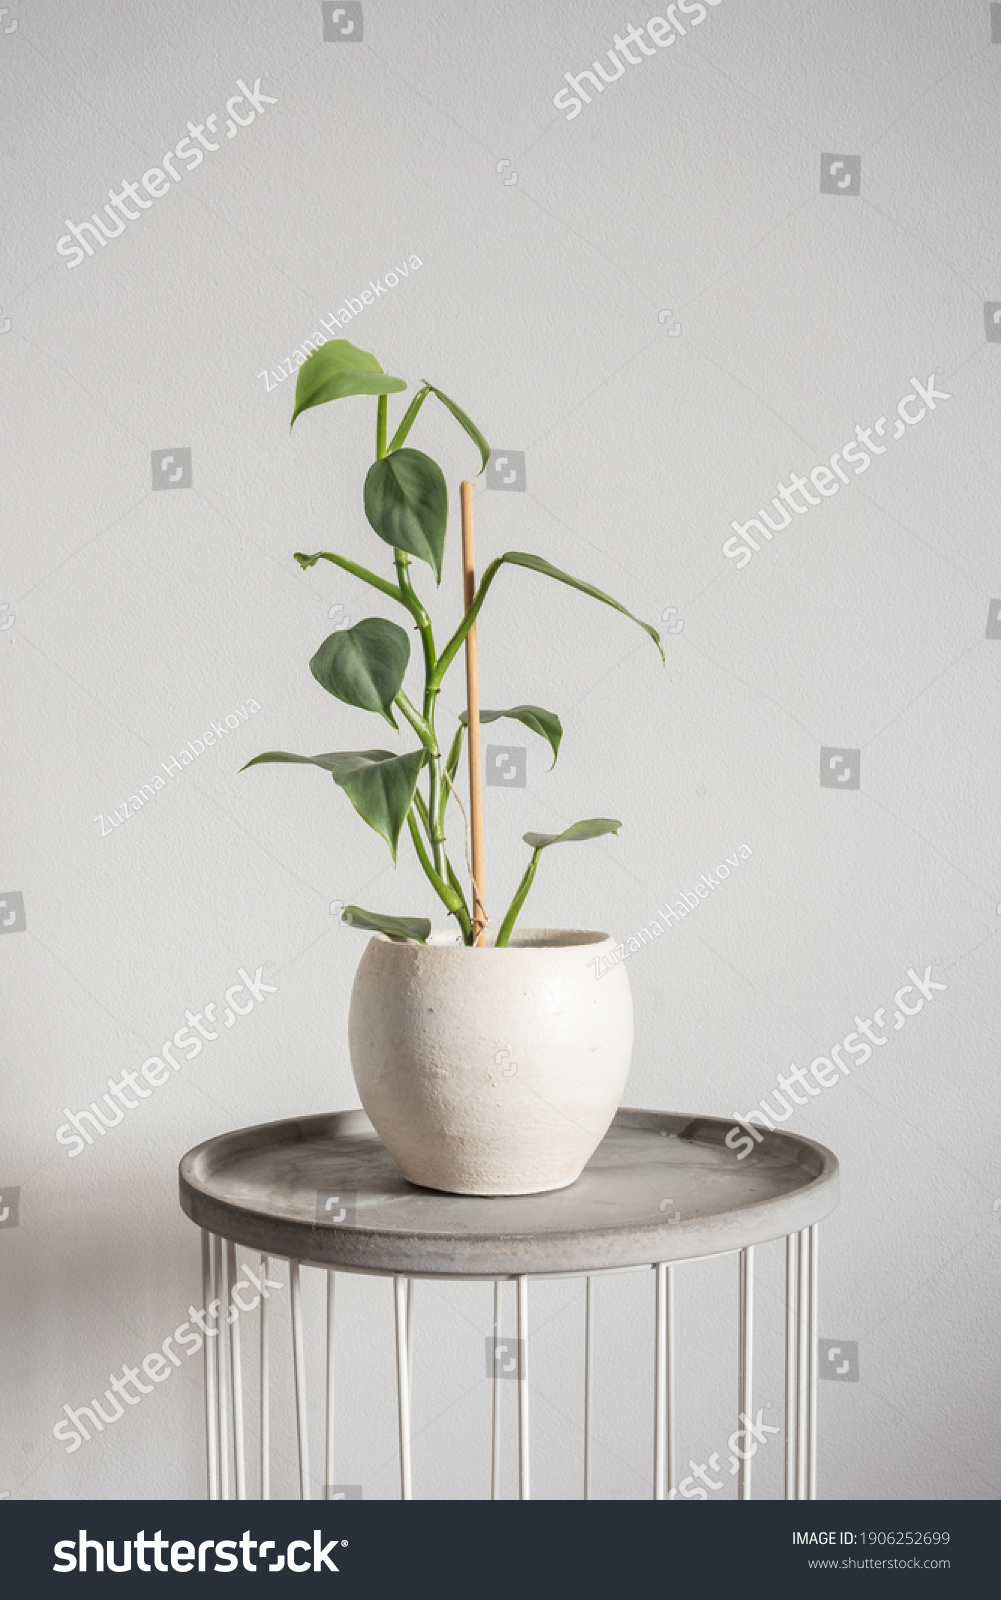 391 Philodendron silver Images, Stock Photos & Vectors | Shutterstock